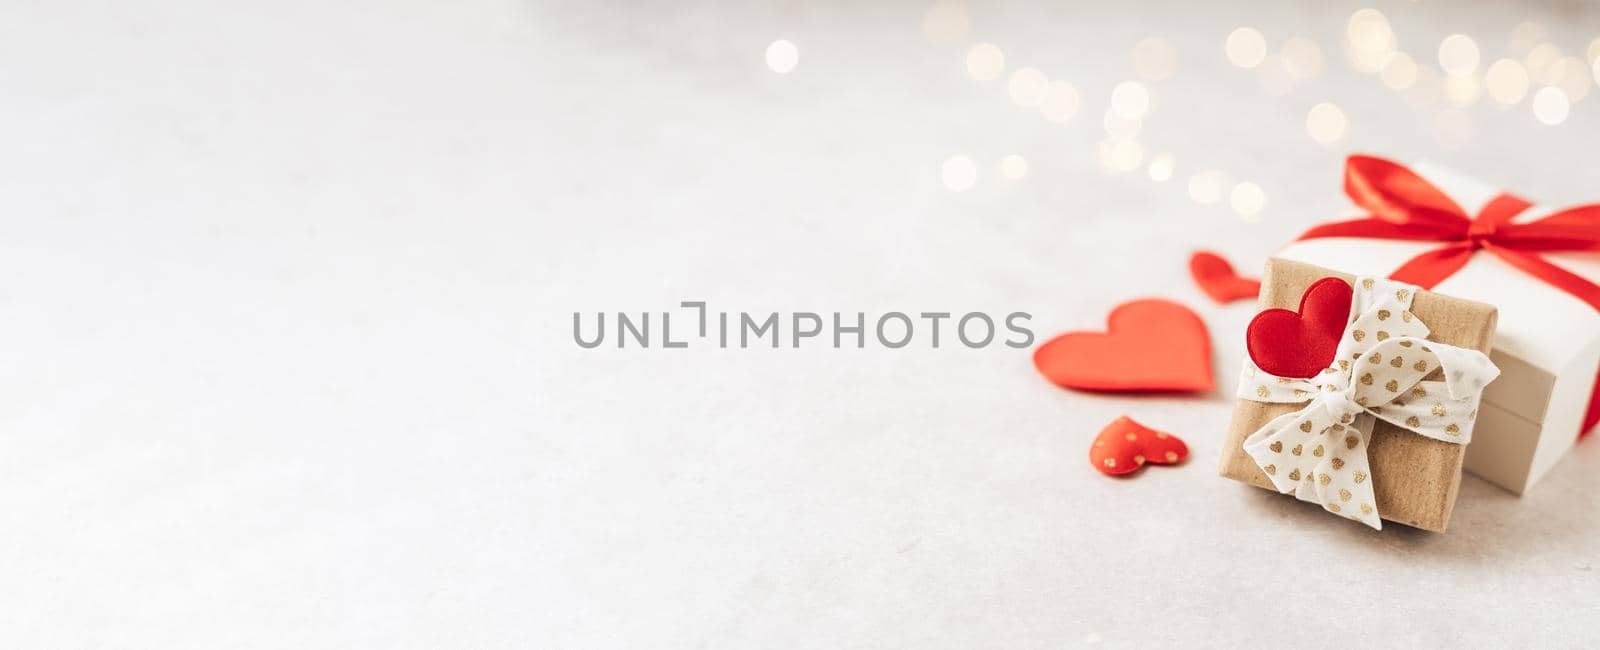 Valentine's Day banner. Gift or present box with red bow and heart shape on lights background. Copy space for text and design. Valentine day gift. Banner for Christmas, hew year, birthday concept by Ostanina